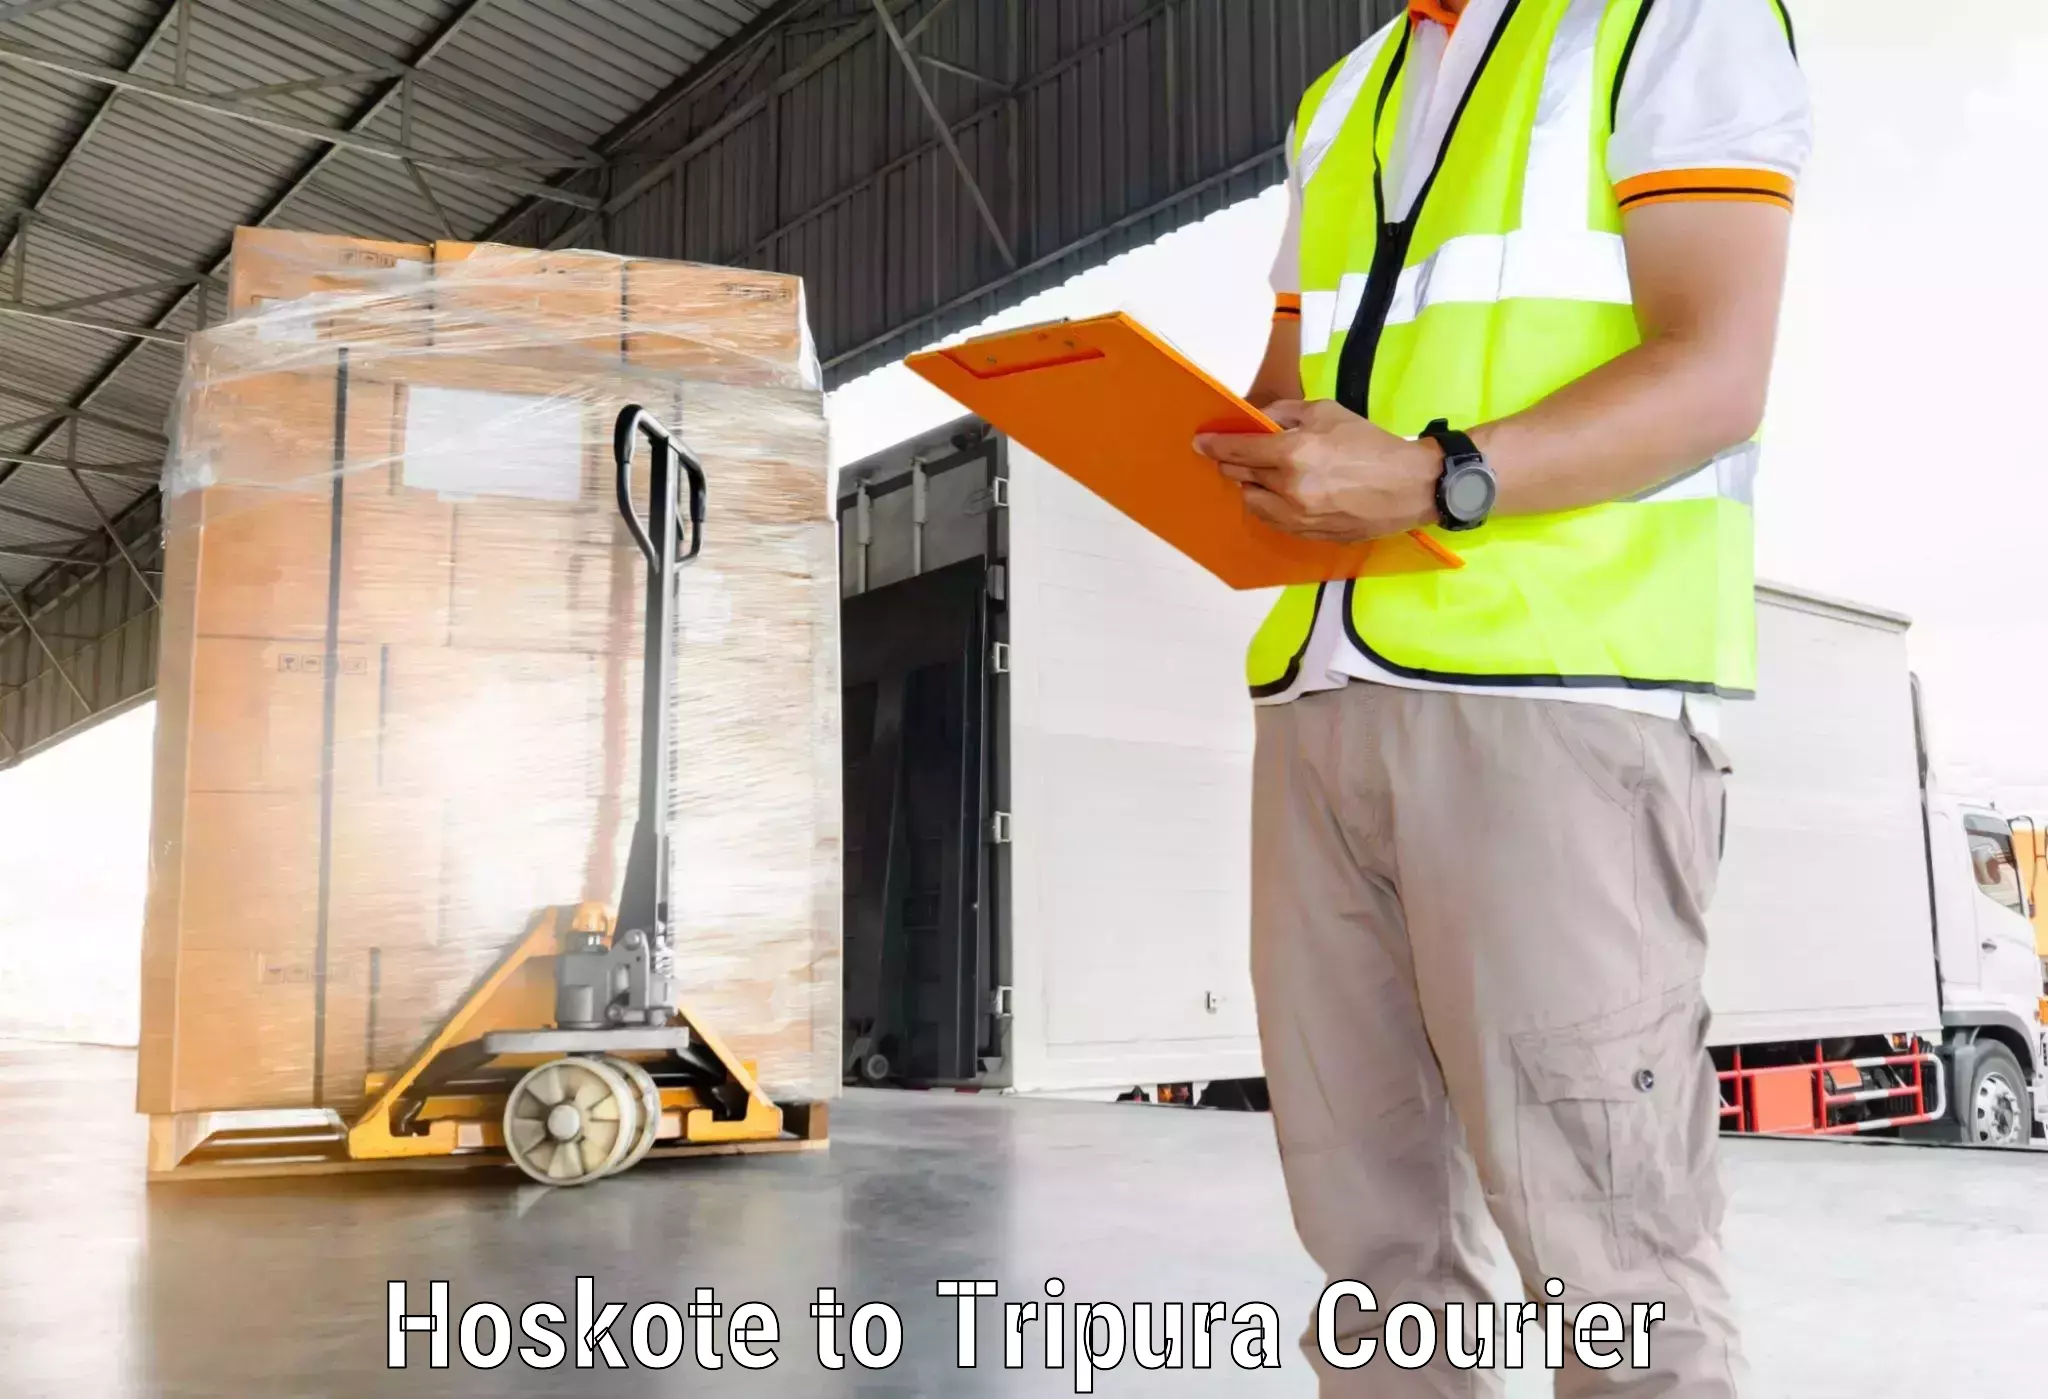 Expedited shipping methods Hoskote to Udaipur Tripura